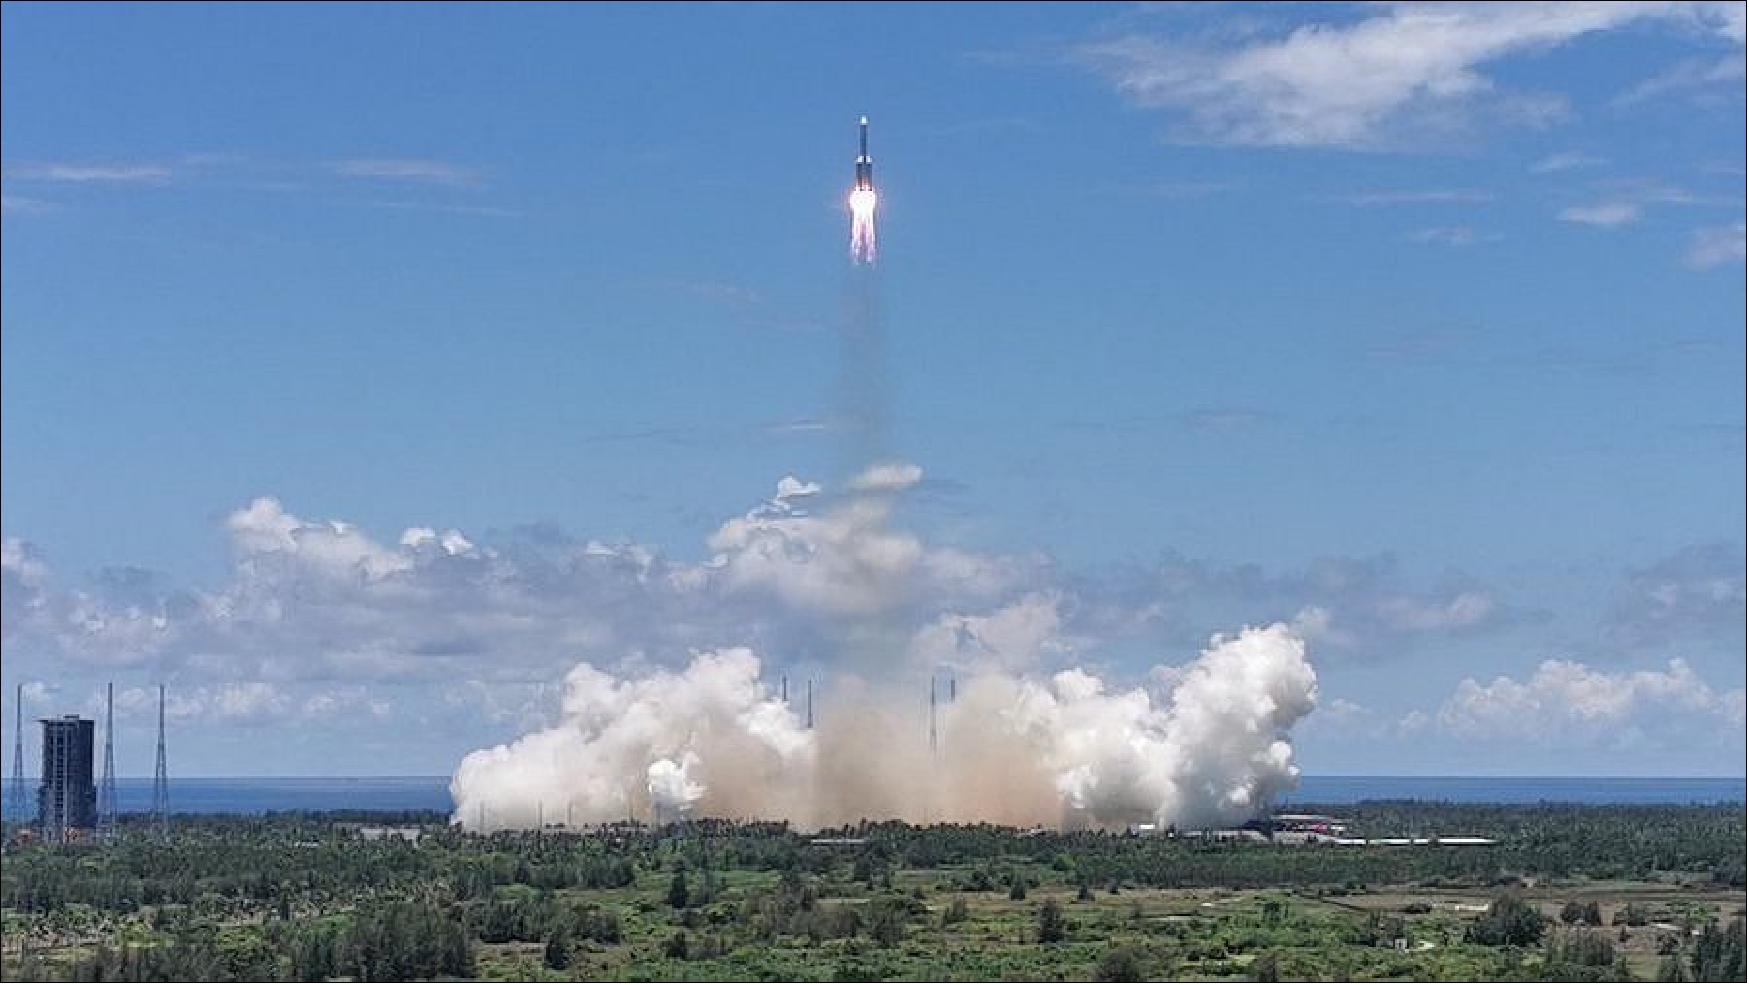 Figure 9: A Long March 5 rocket takes off from the Wenchang Space Launch Center on Hainan Island with the Tianwen-1 Mars mission (image credit: Xinhua)